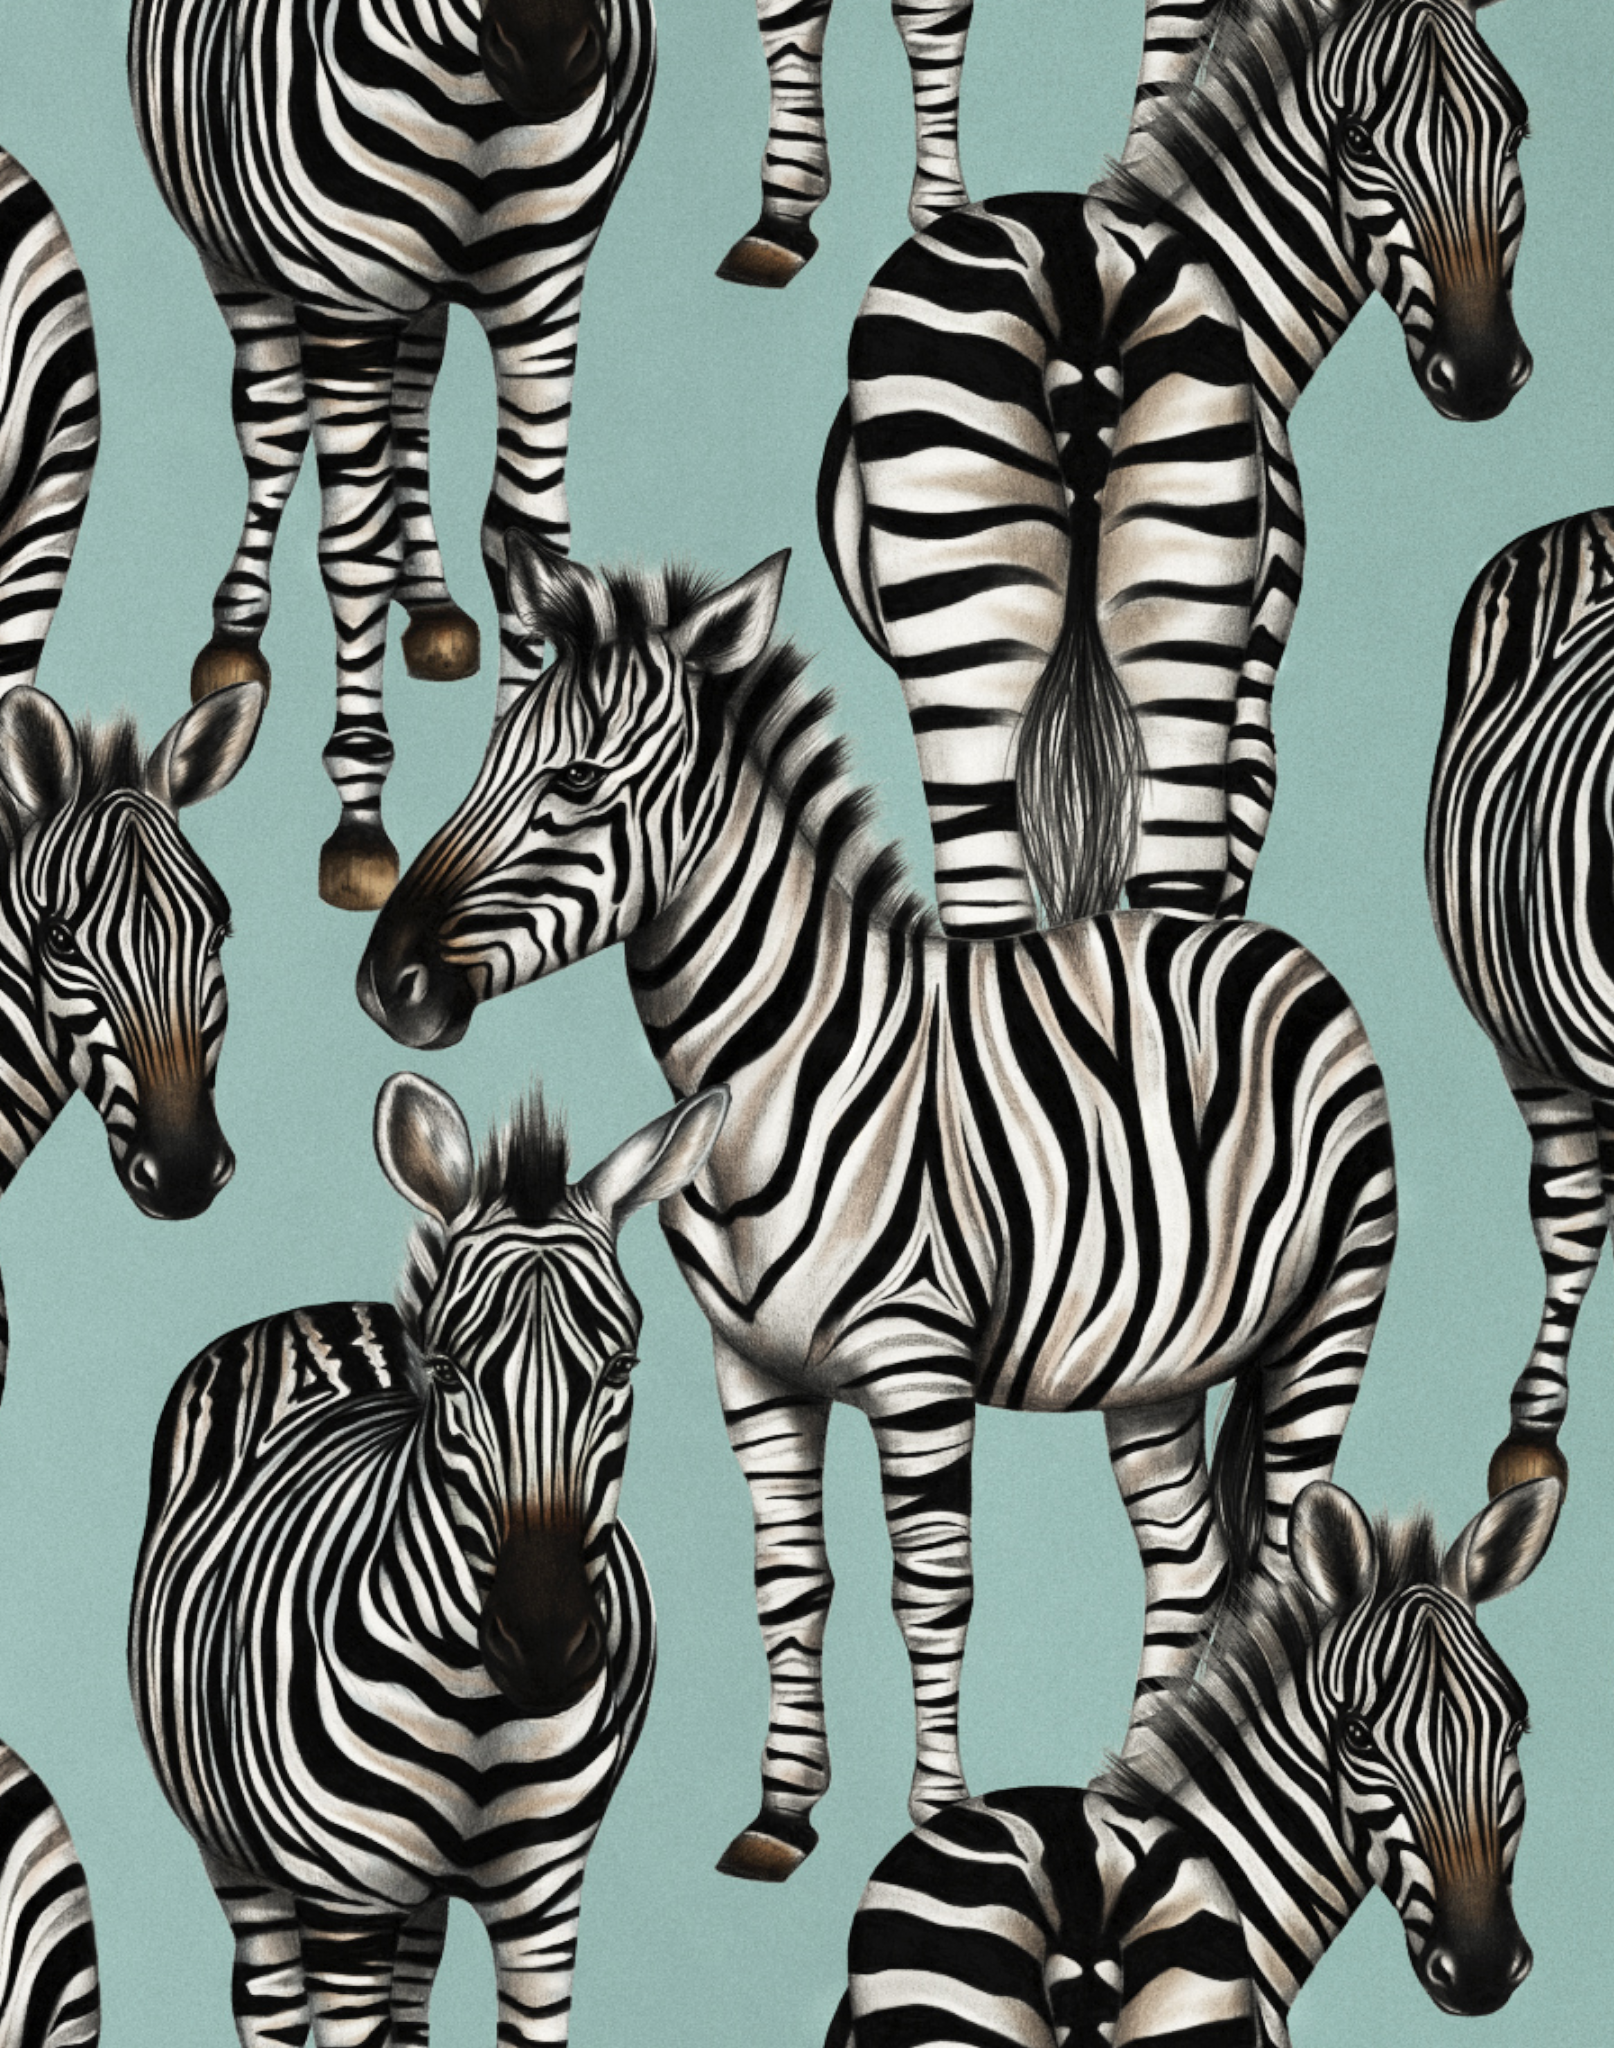 Zebras – The Pattern Collective